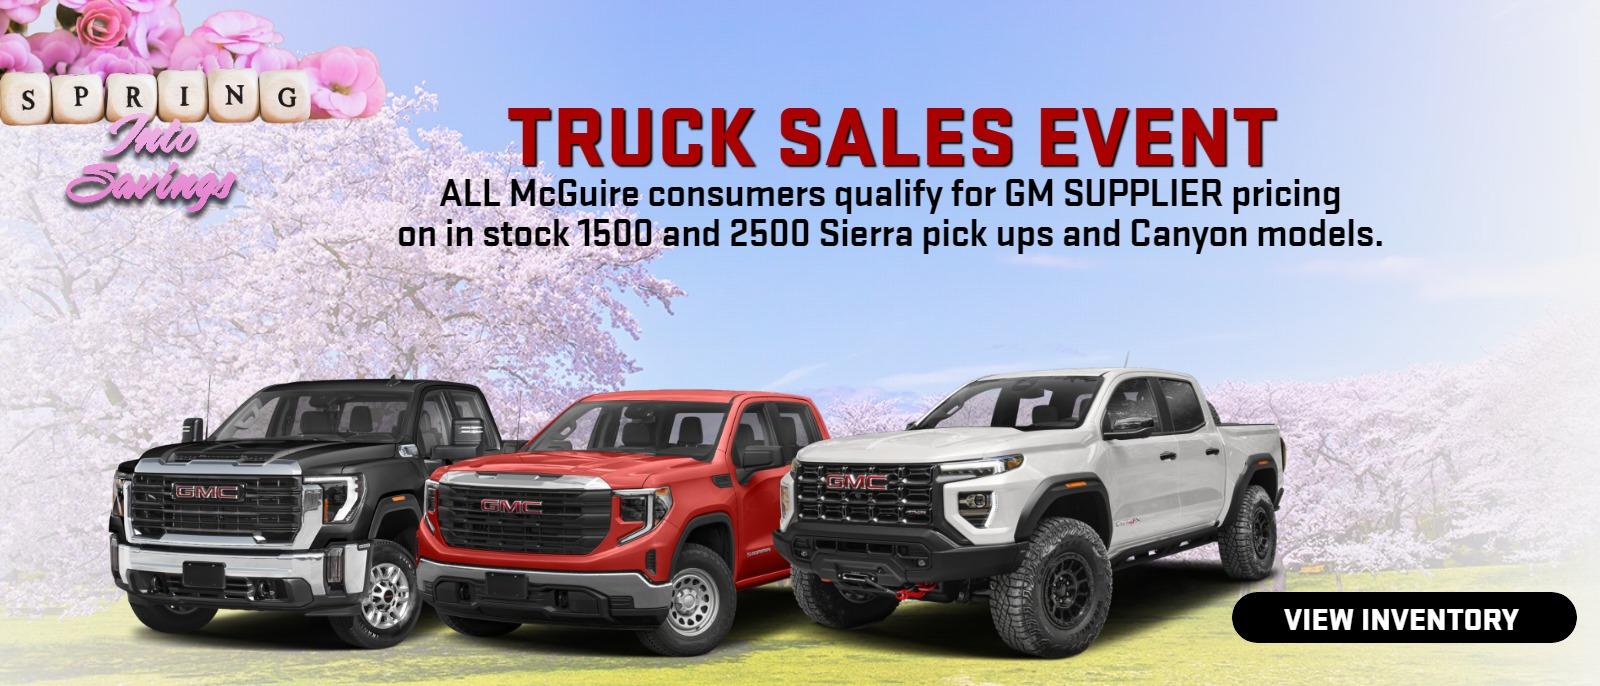 MARCH MADNESS TRUCK SALES EVENT
March madness truck sales event.
ALL consumers qualify for GM SUPPLIER pricing
on in stock 1500 and 2500 Sierra pick ups.